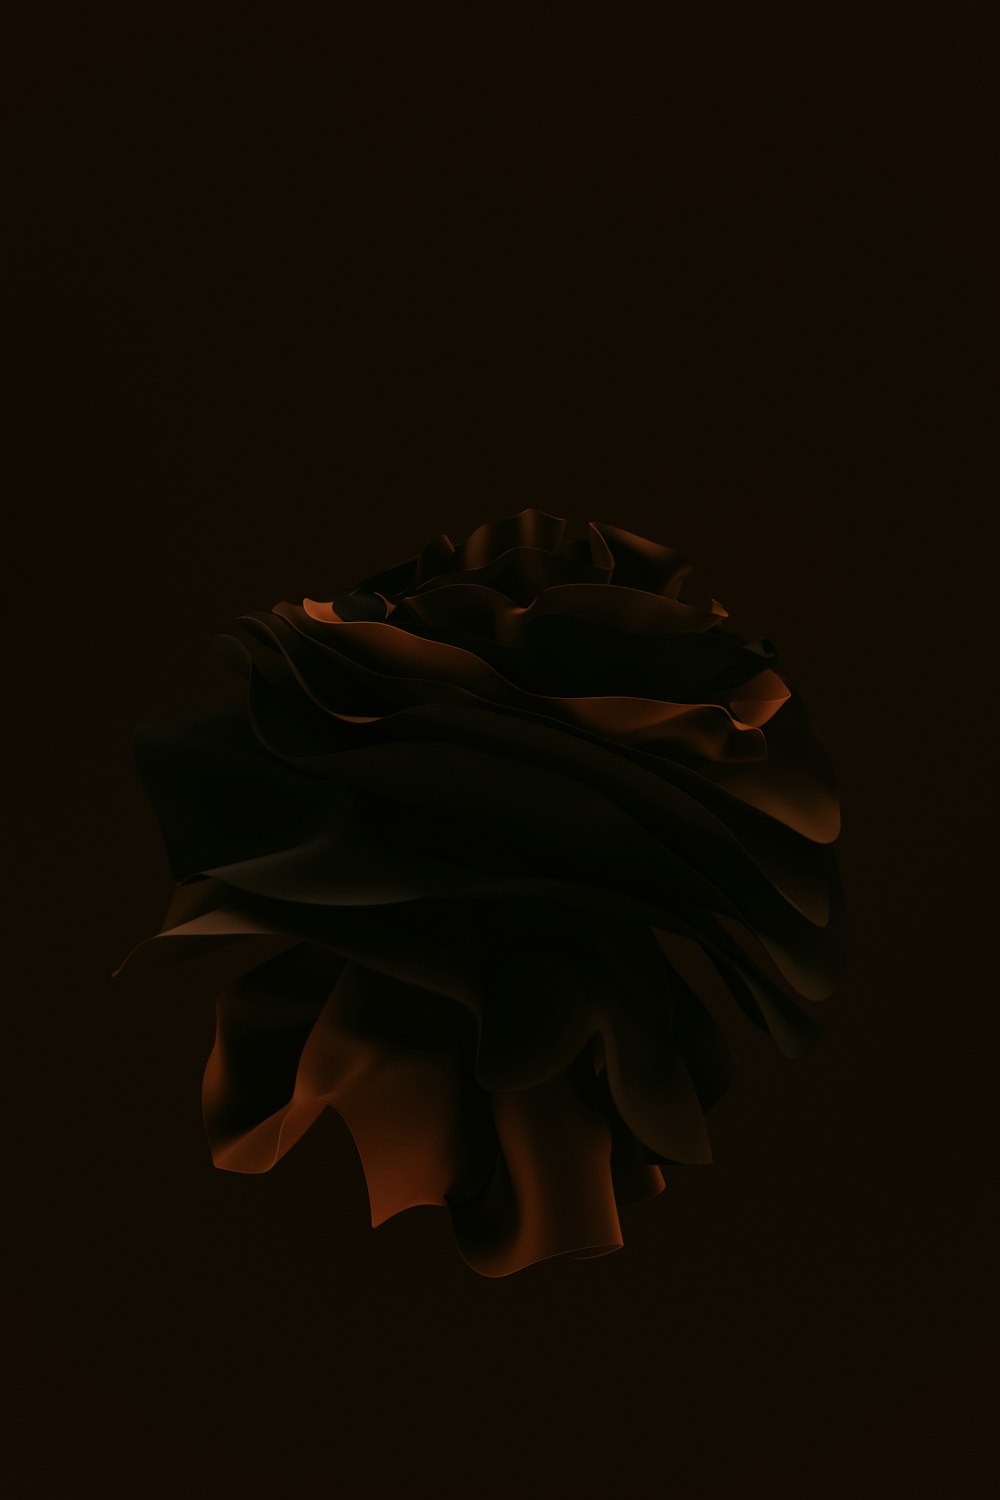 a dark background with a flower in the center